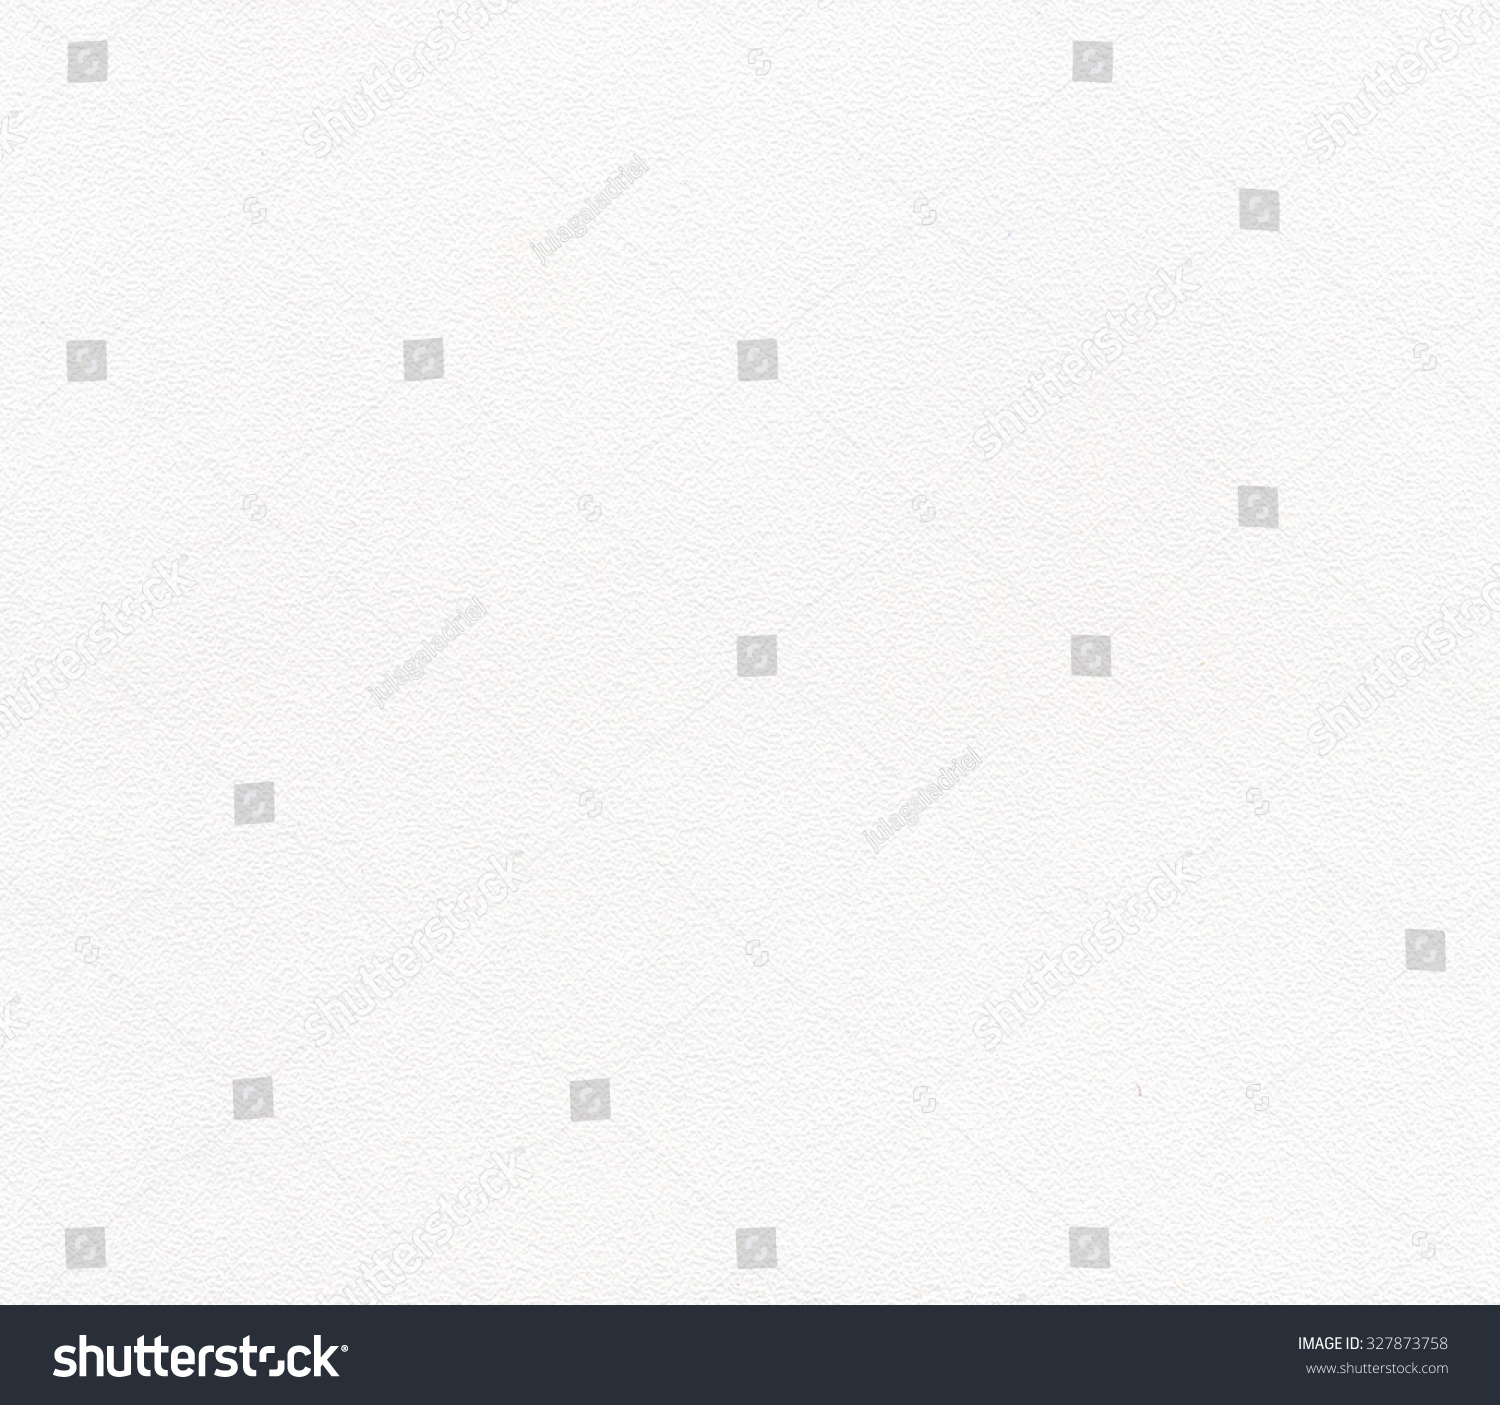 Watercolor Paper Texture Background Stock Photo 327873758 - Shutterstock